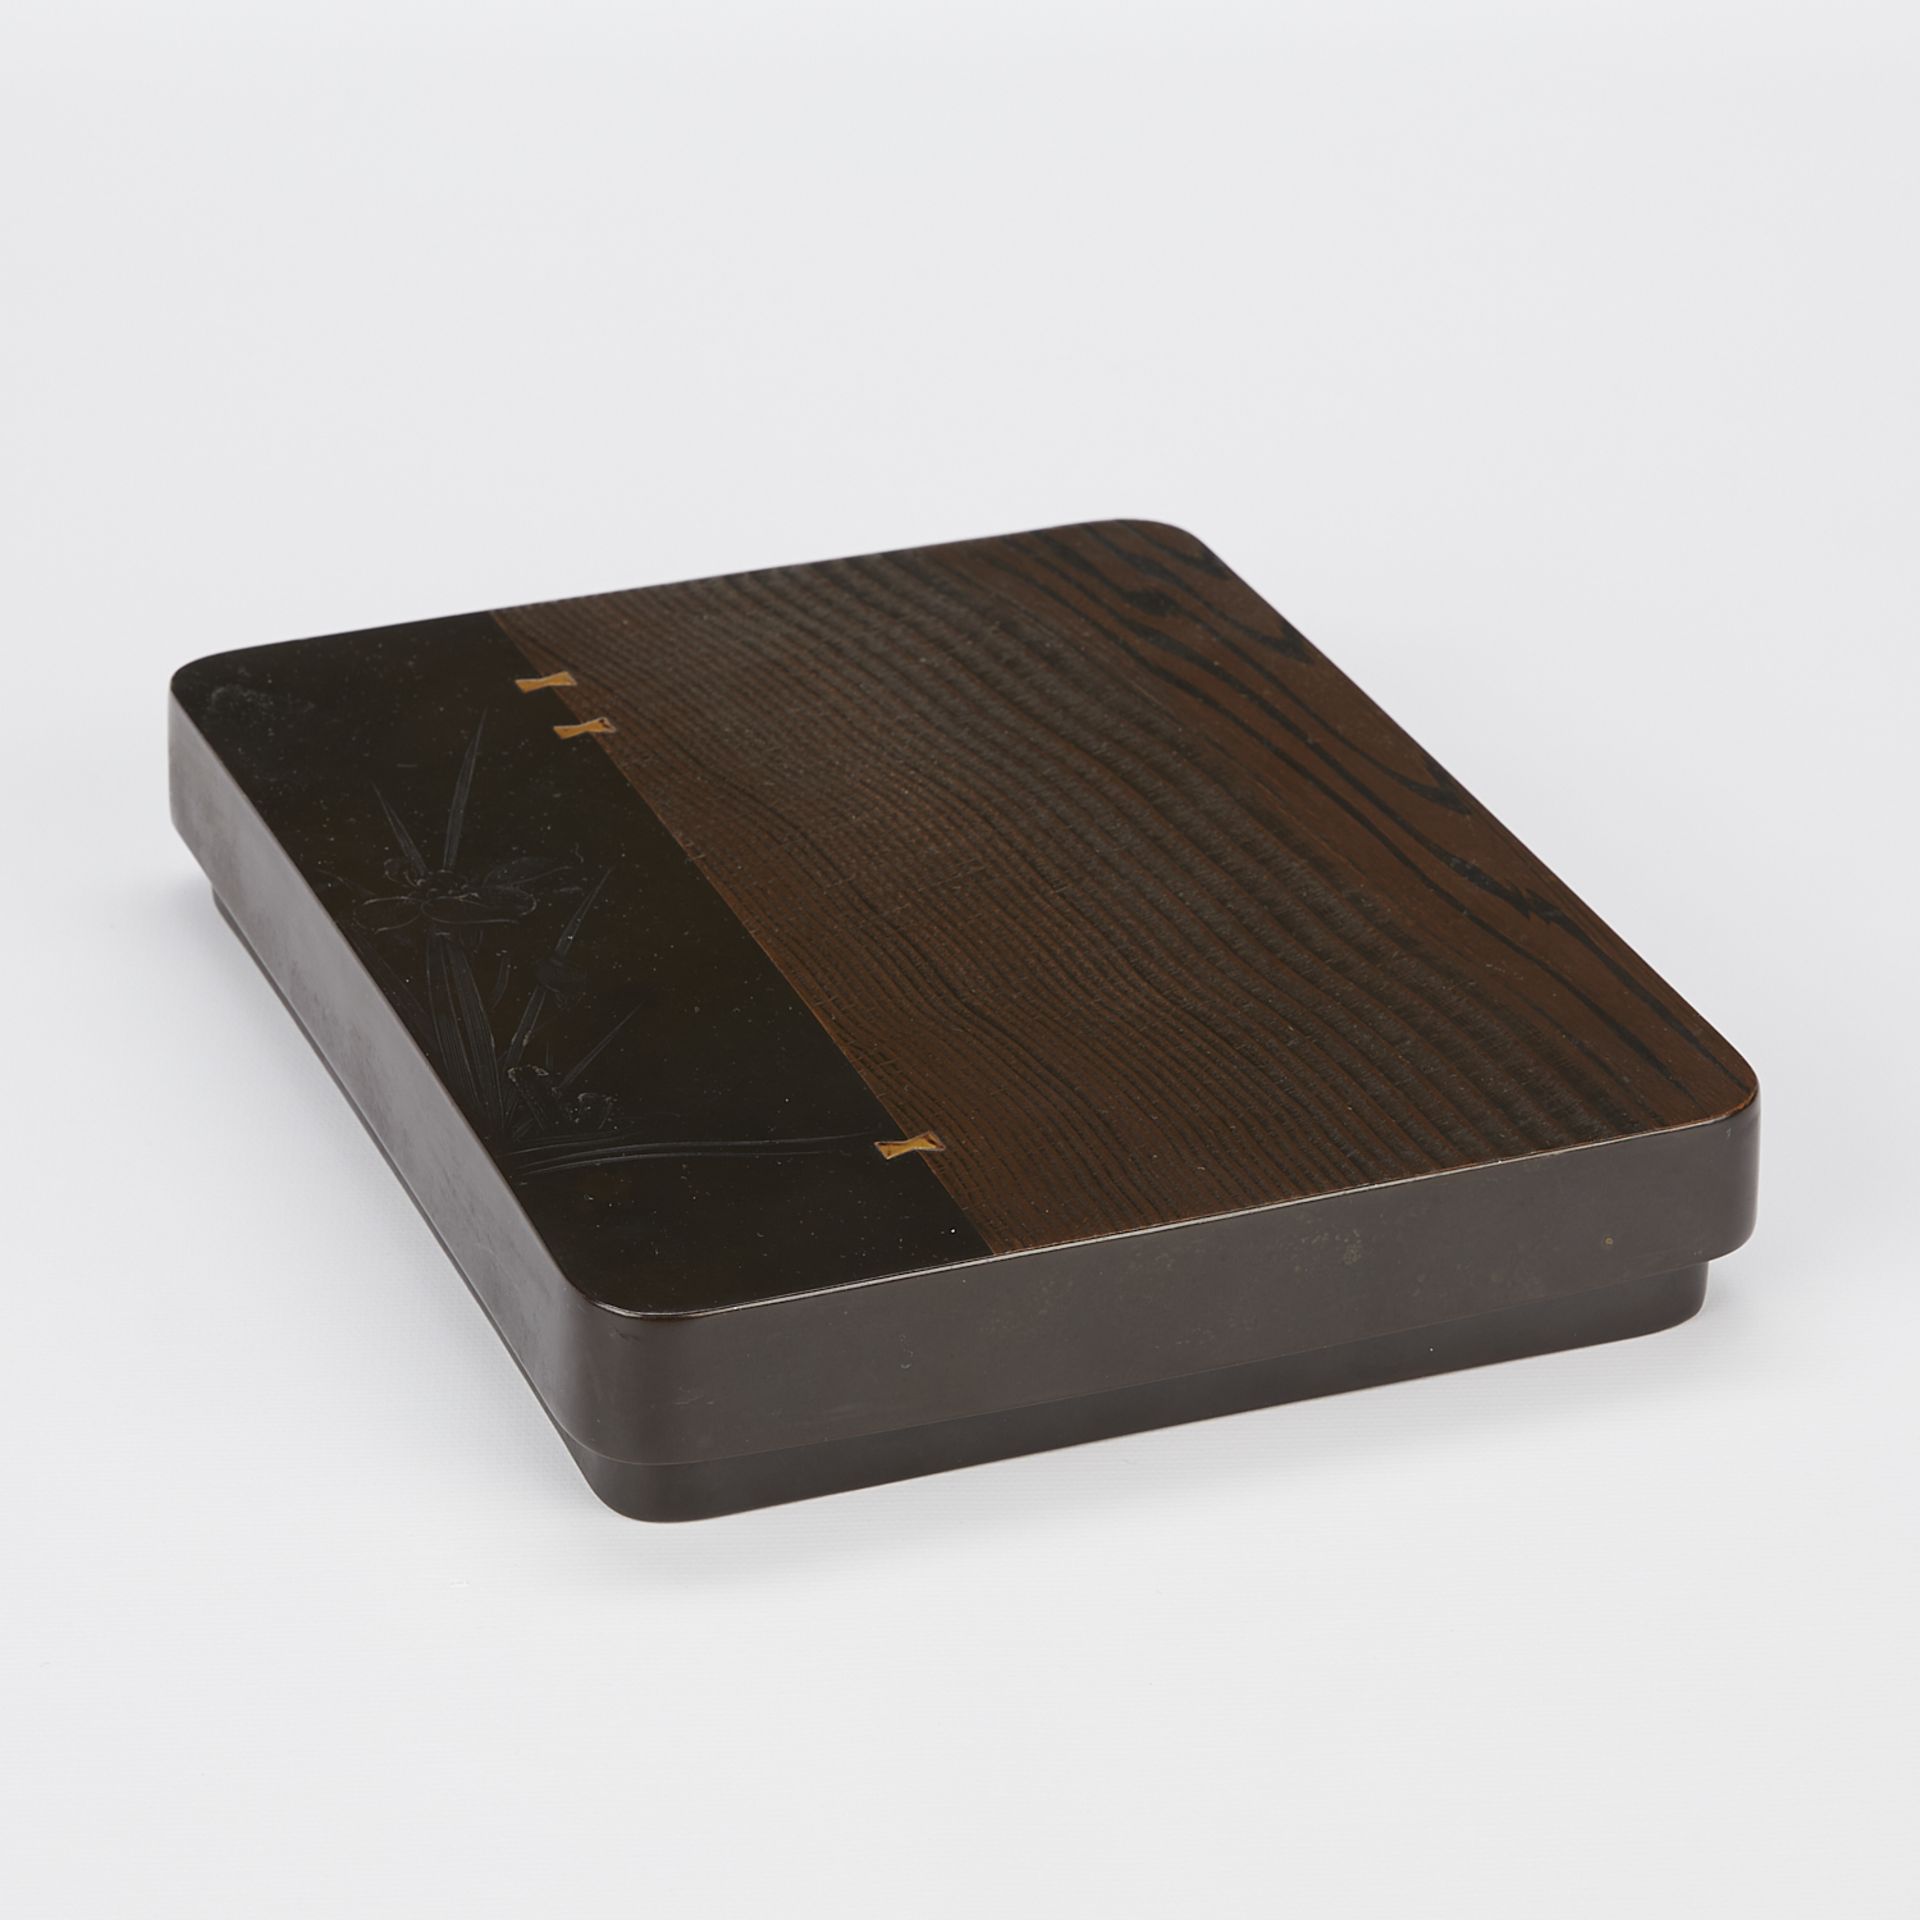 Japanese Lacquered Bunko Document Box - Image 4 of 8